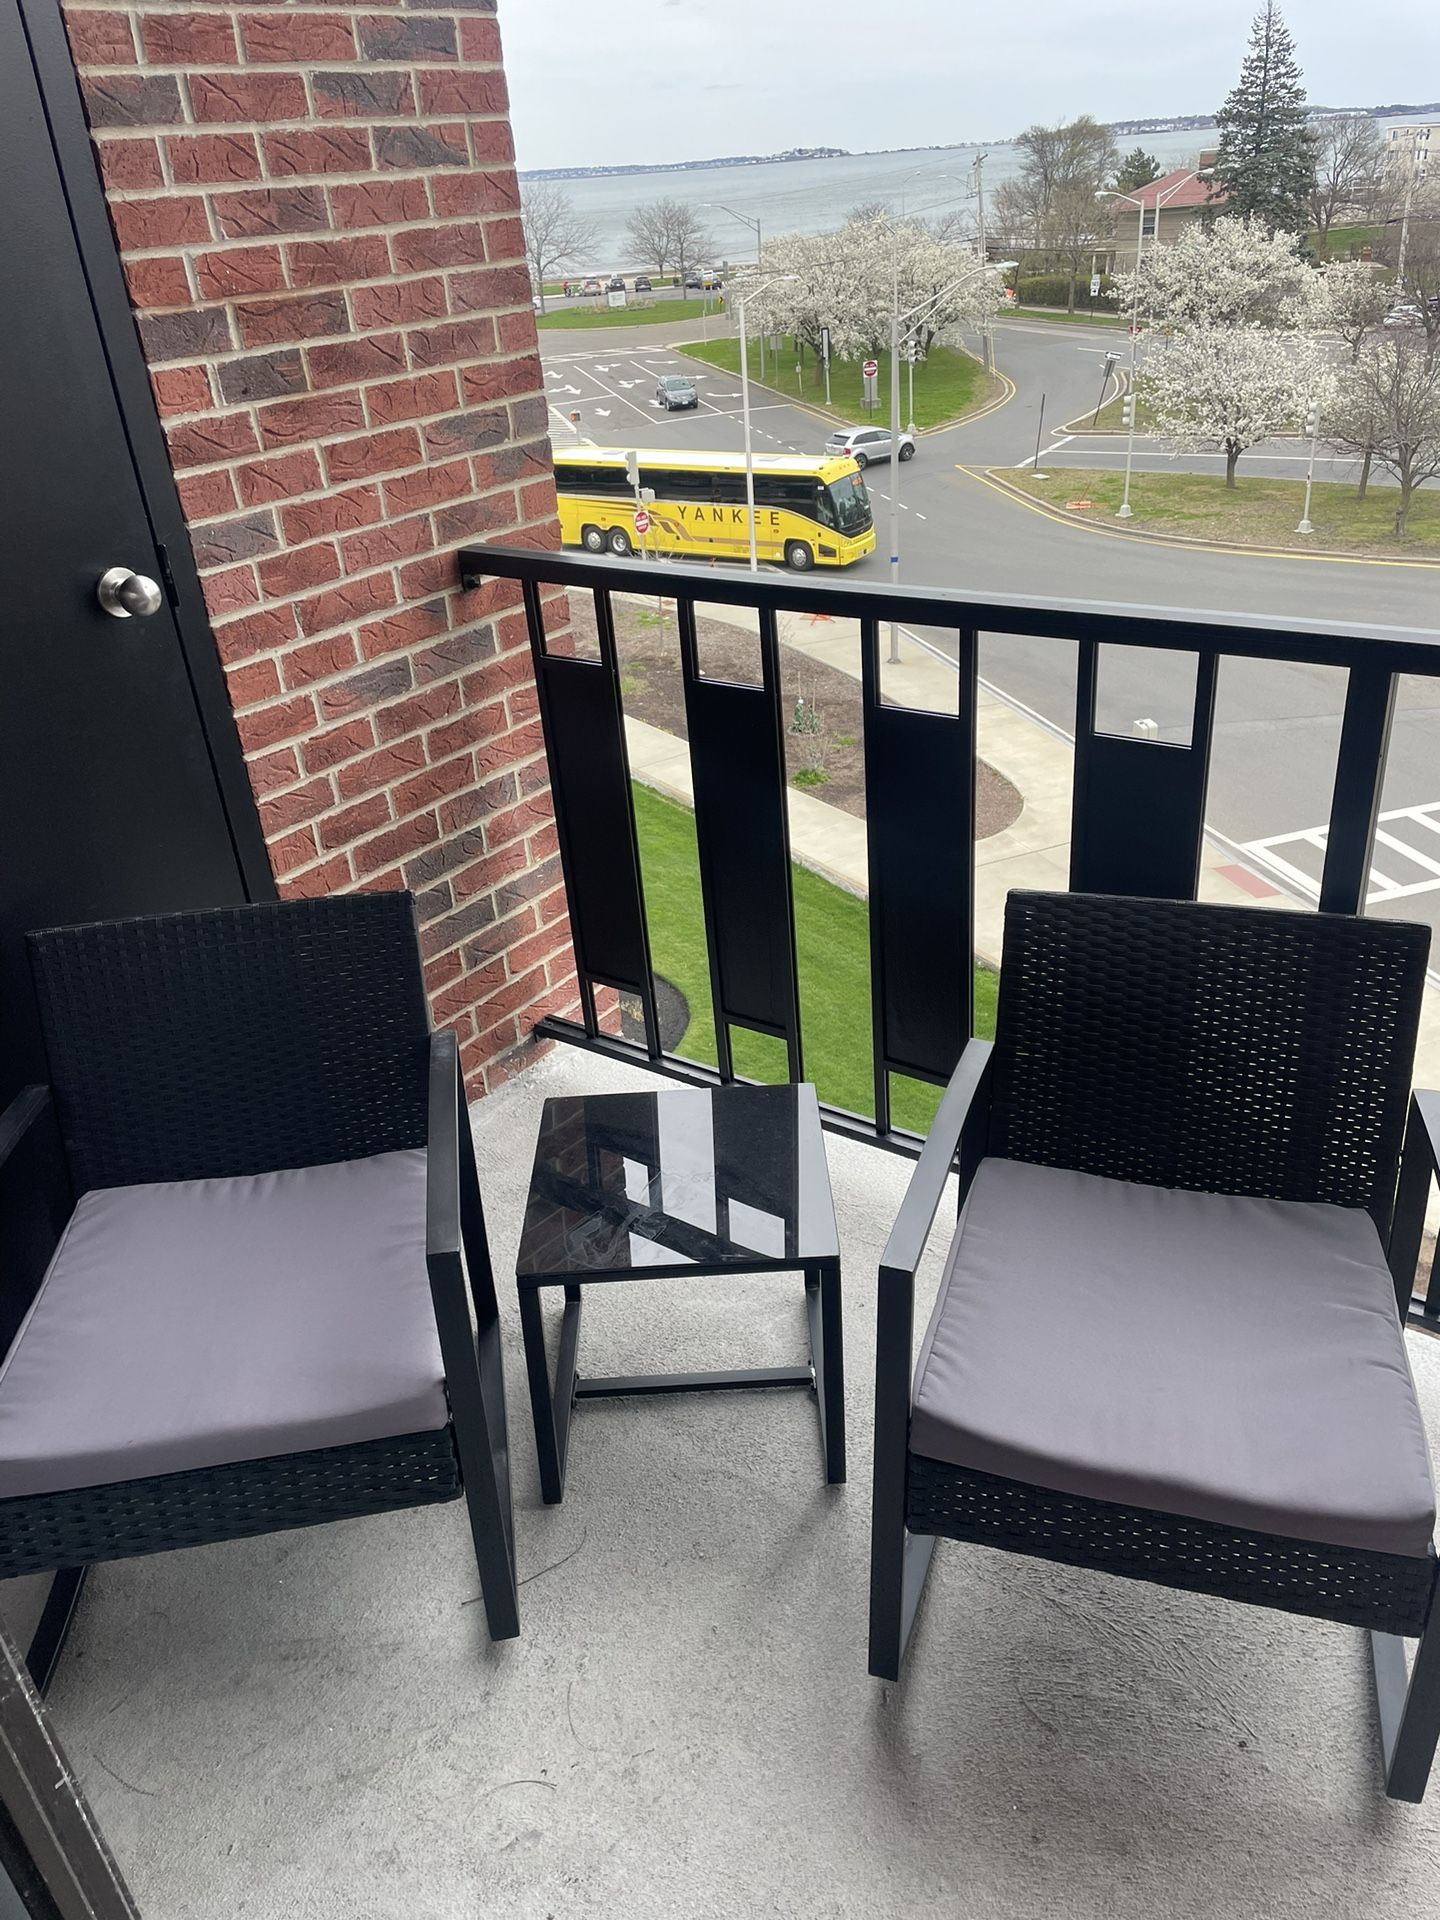 3 Piece Patio Furniture- Rocking Chair With Coffee Table